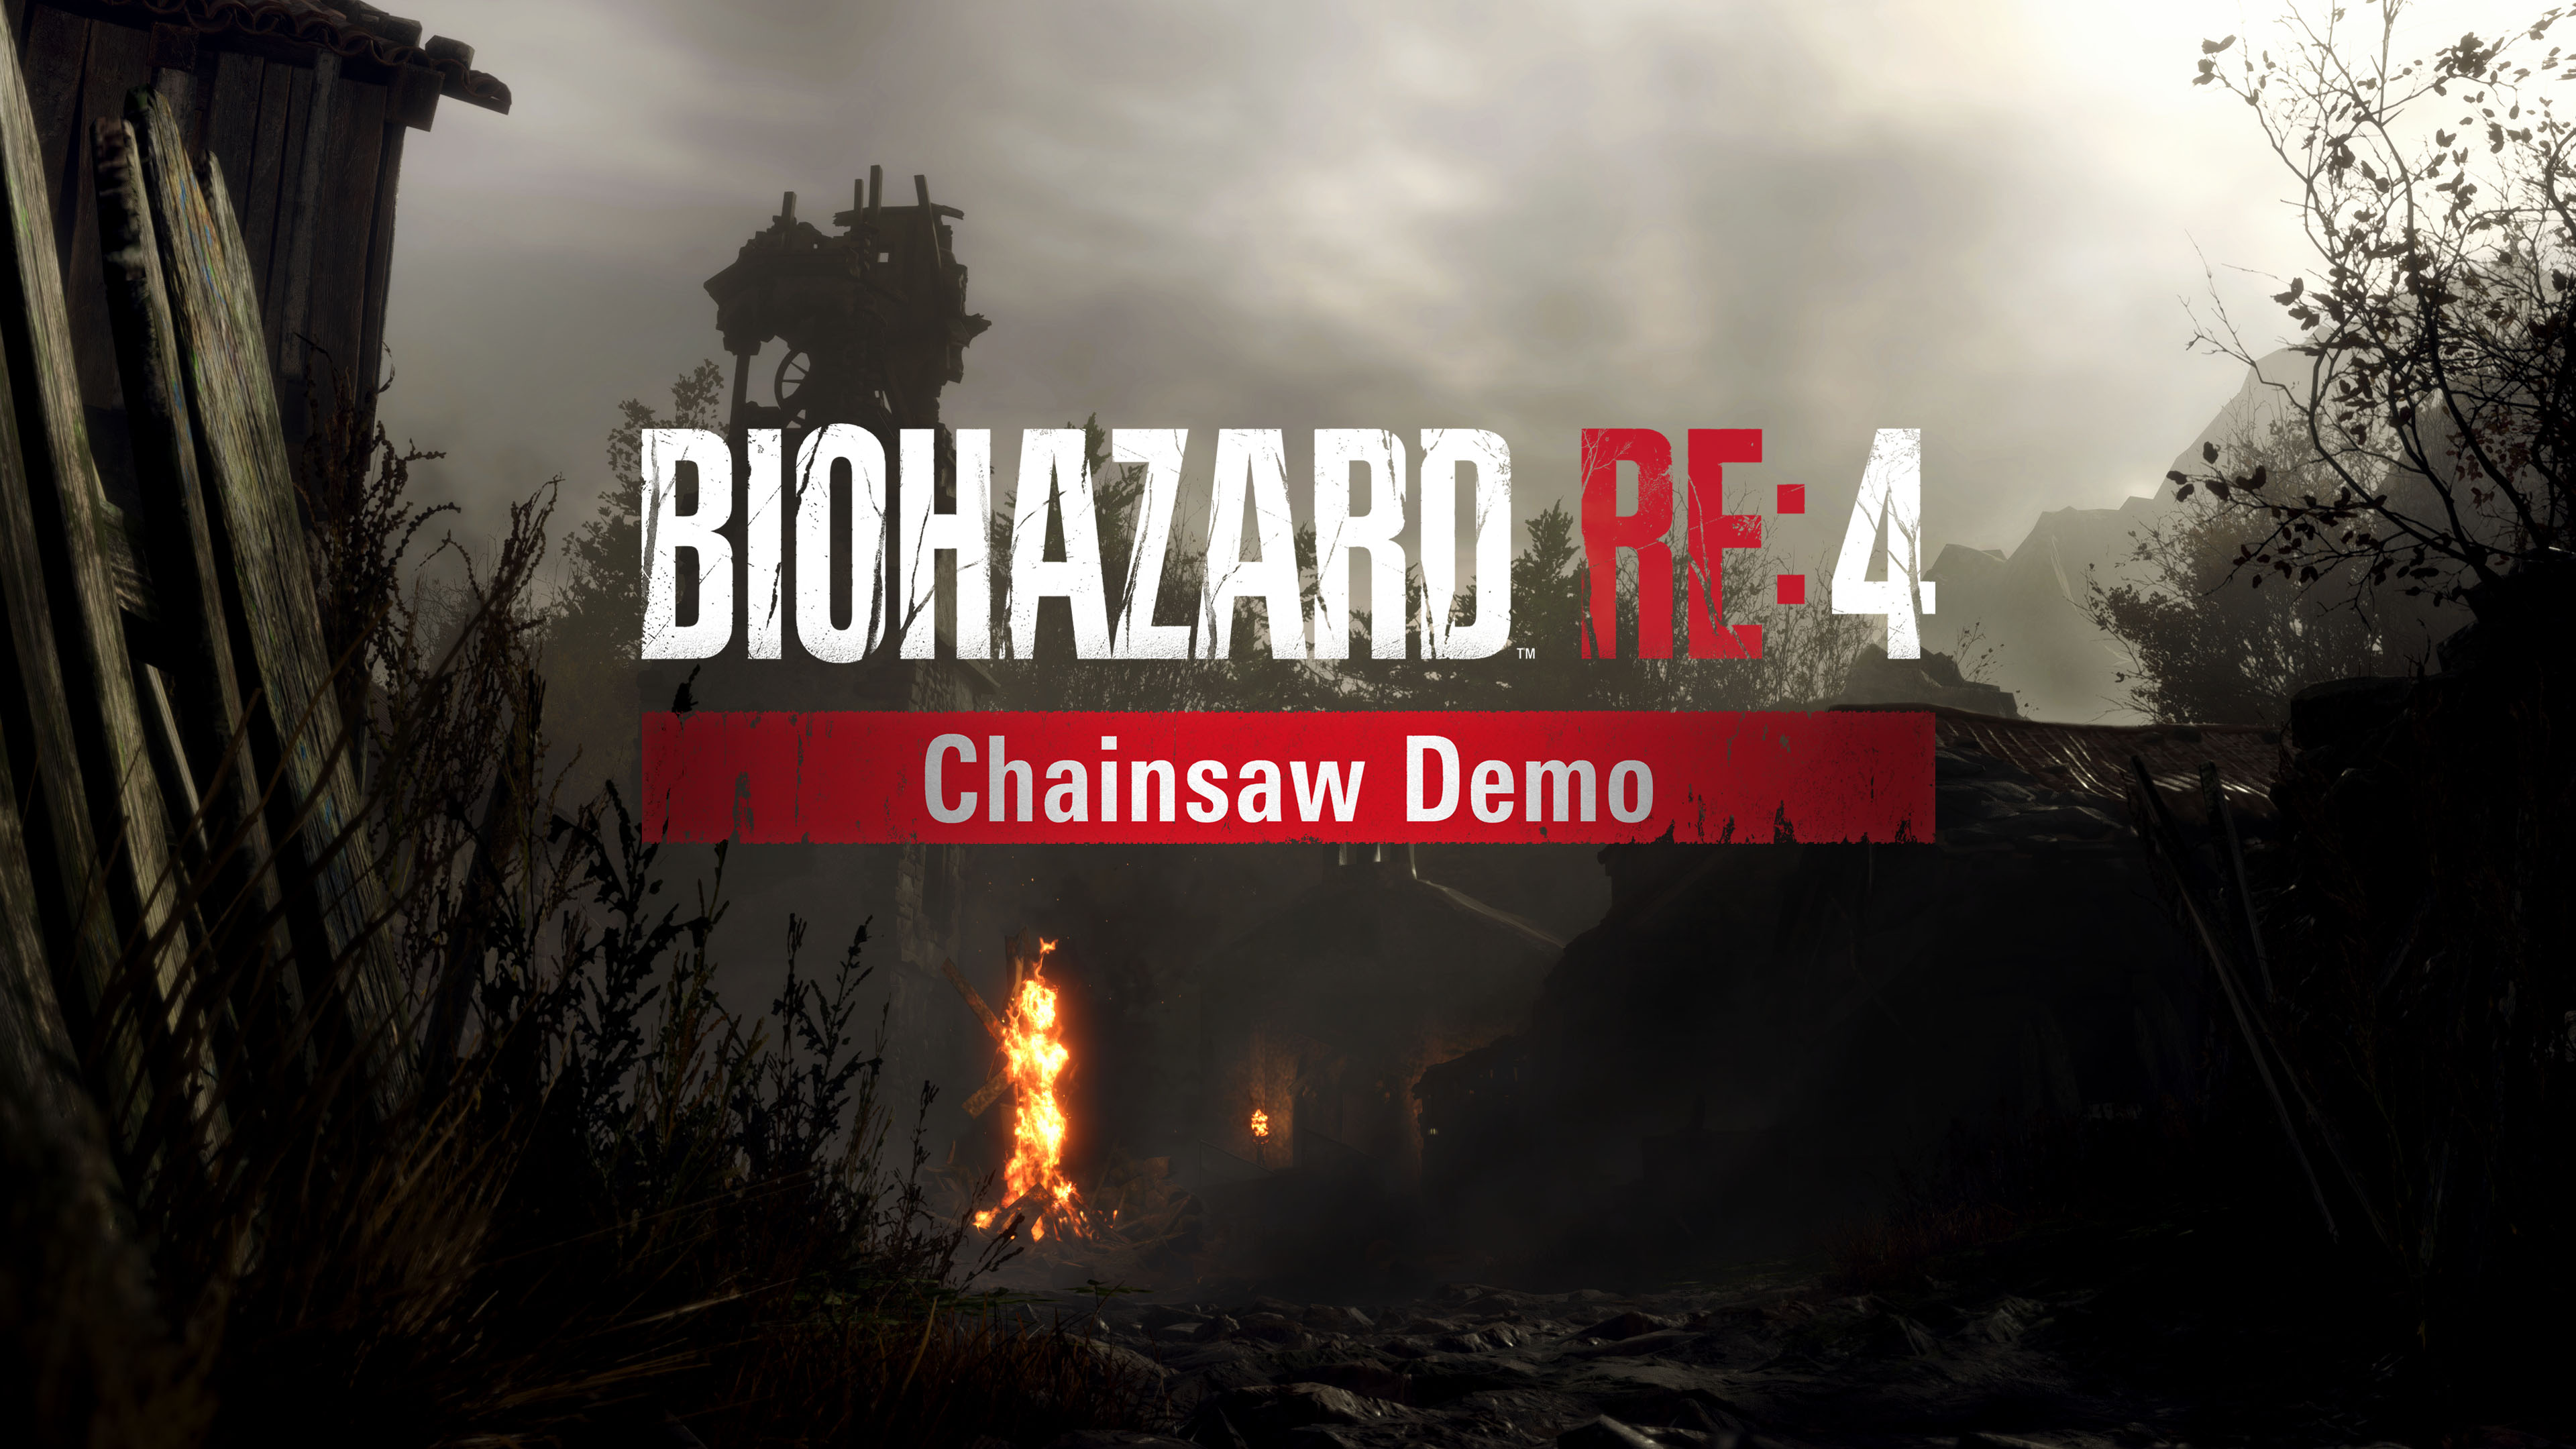 Resident Evil 4 remake just got its aptly titled Chainsaw demo